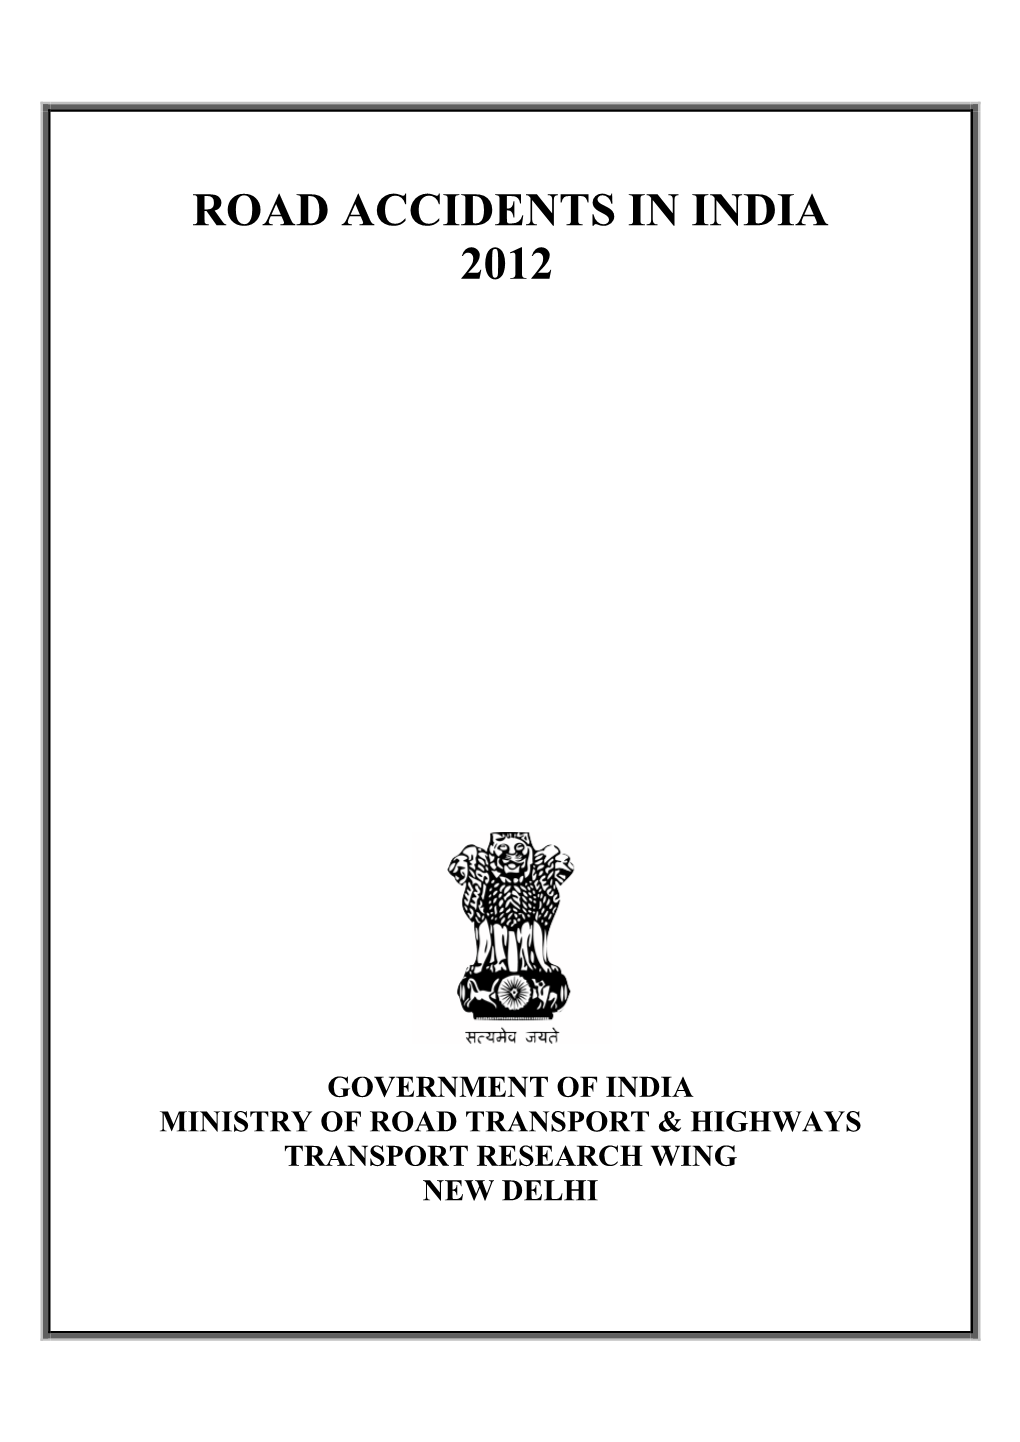 Road Accidents in India 2012